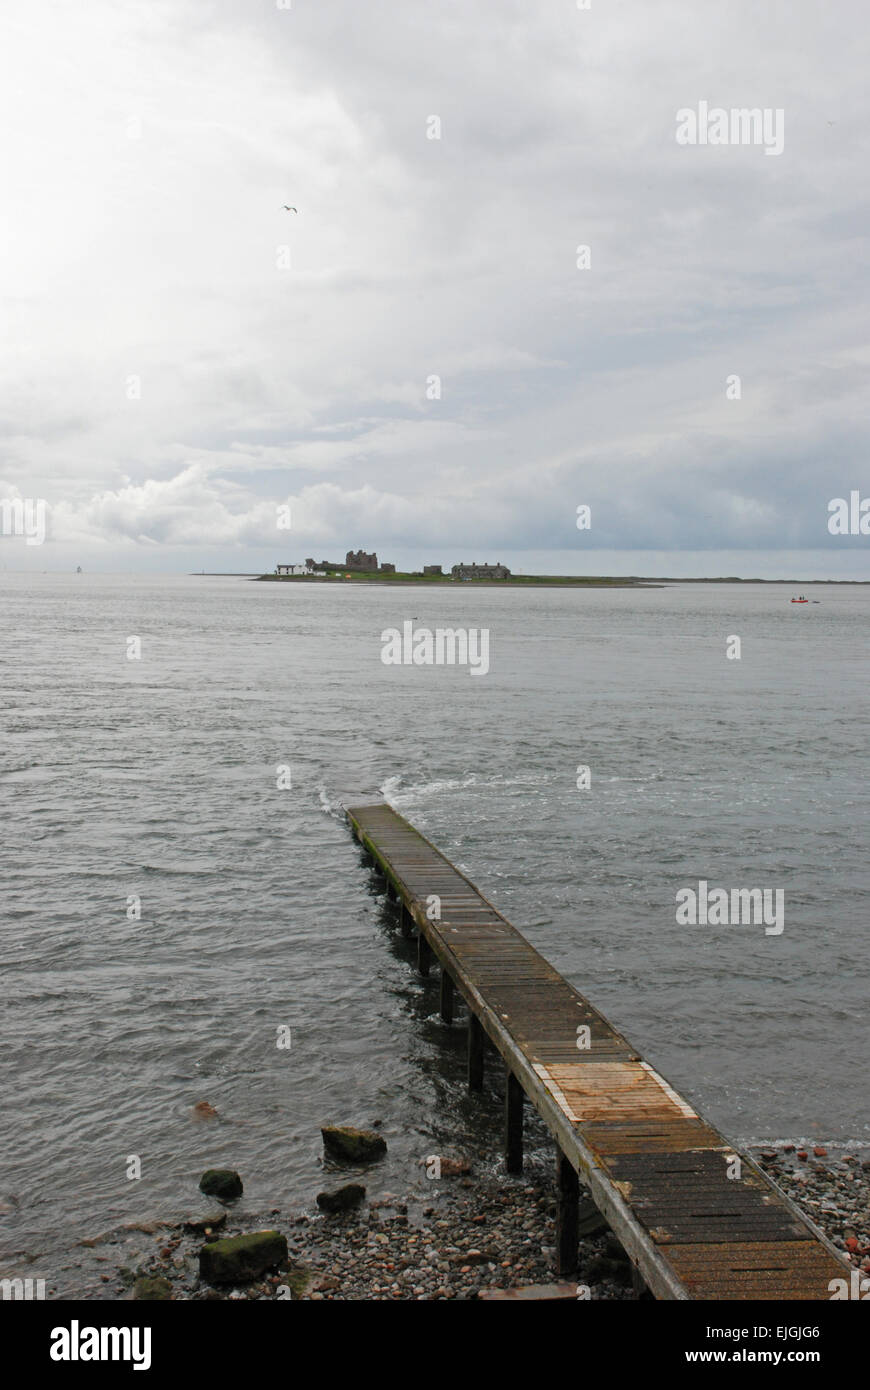 Piel Island off the coast of Cumbria with small boat jetty leading out into the water Stock Photo